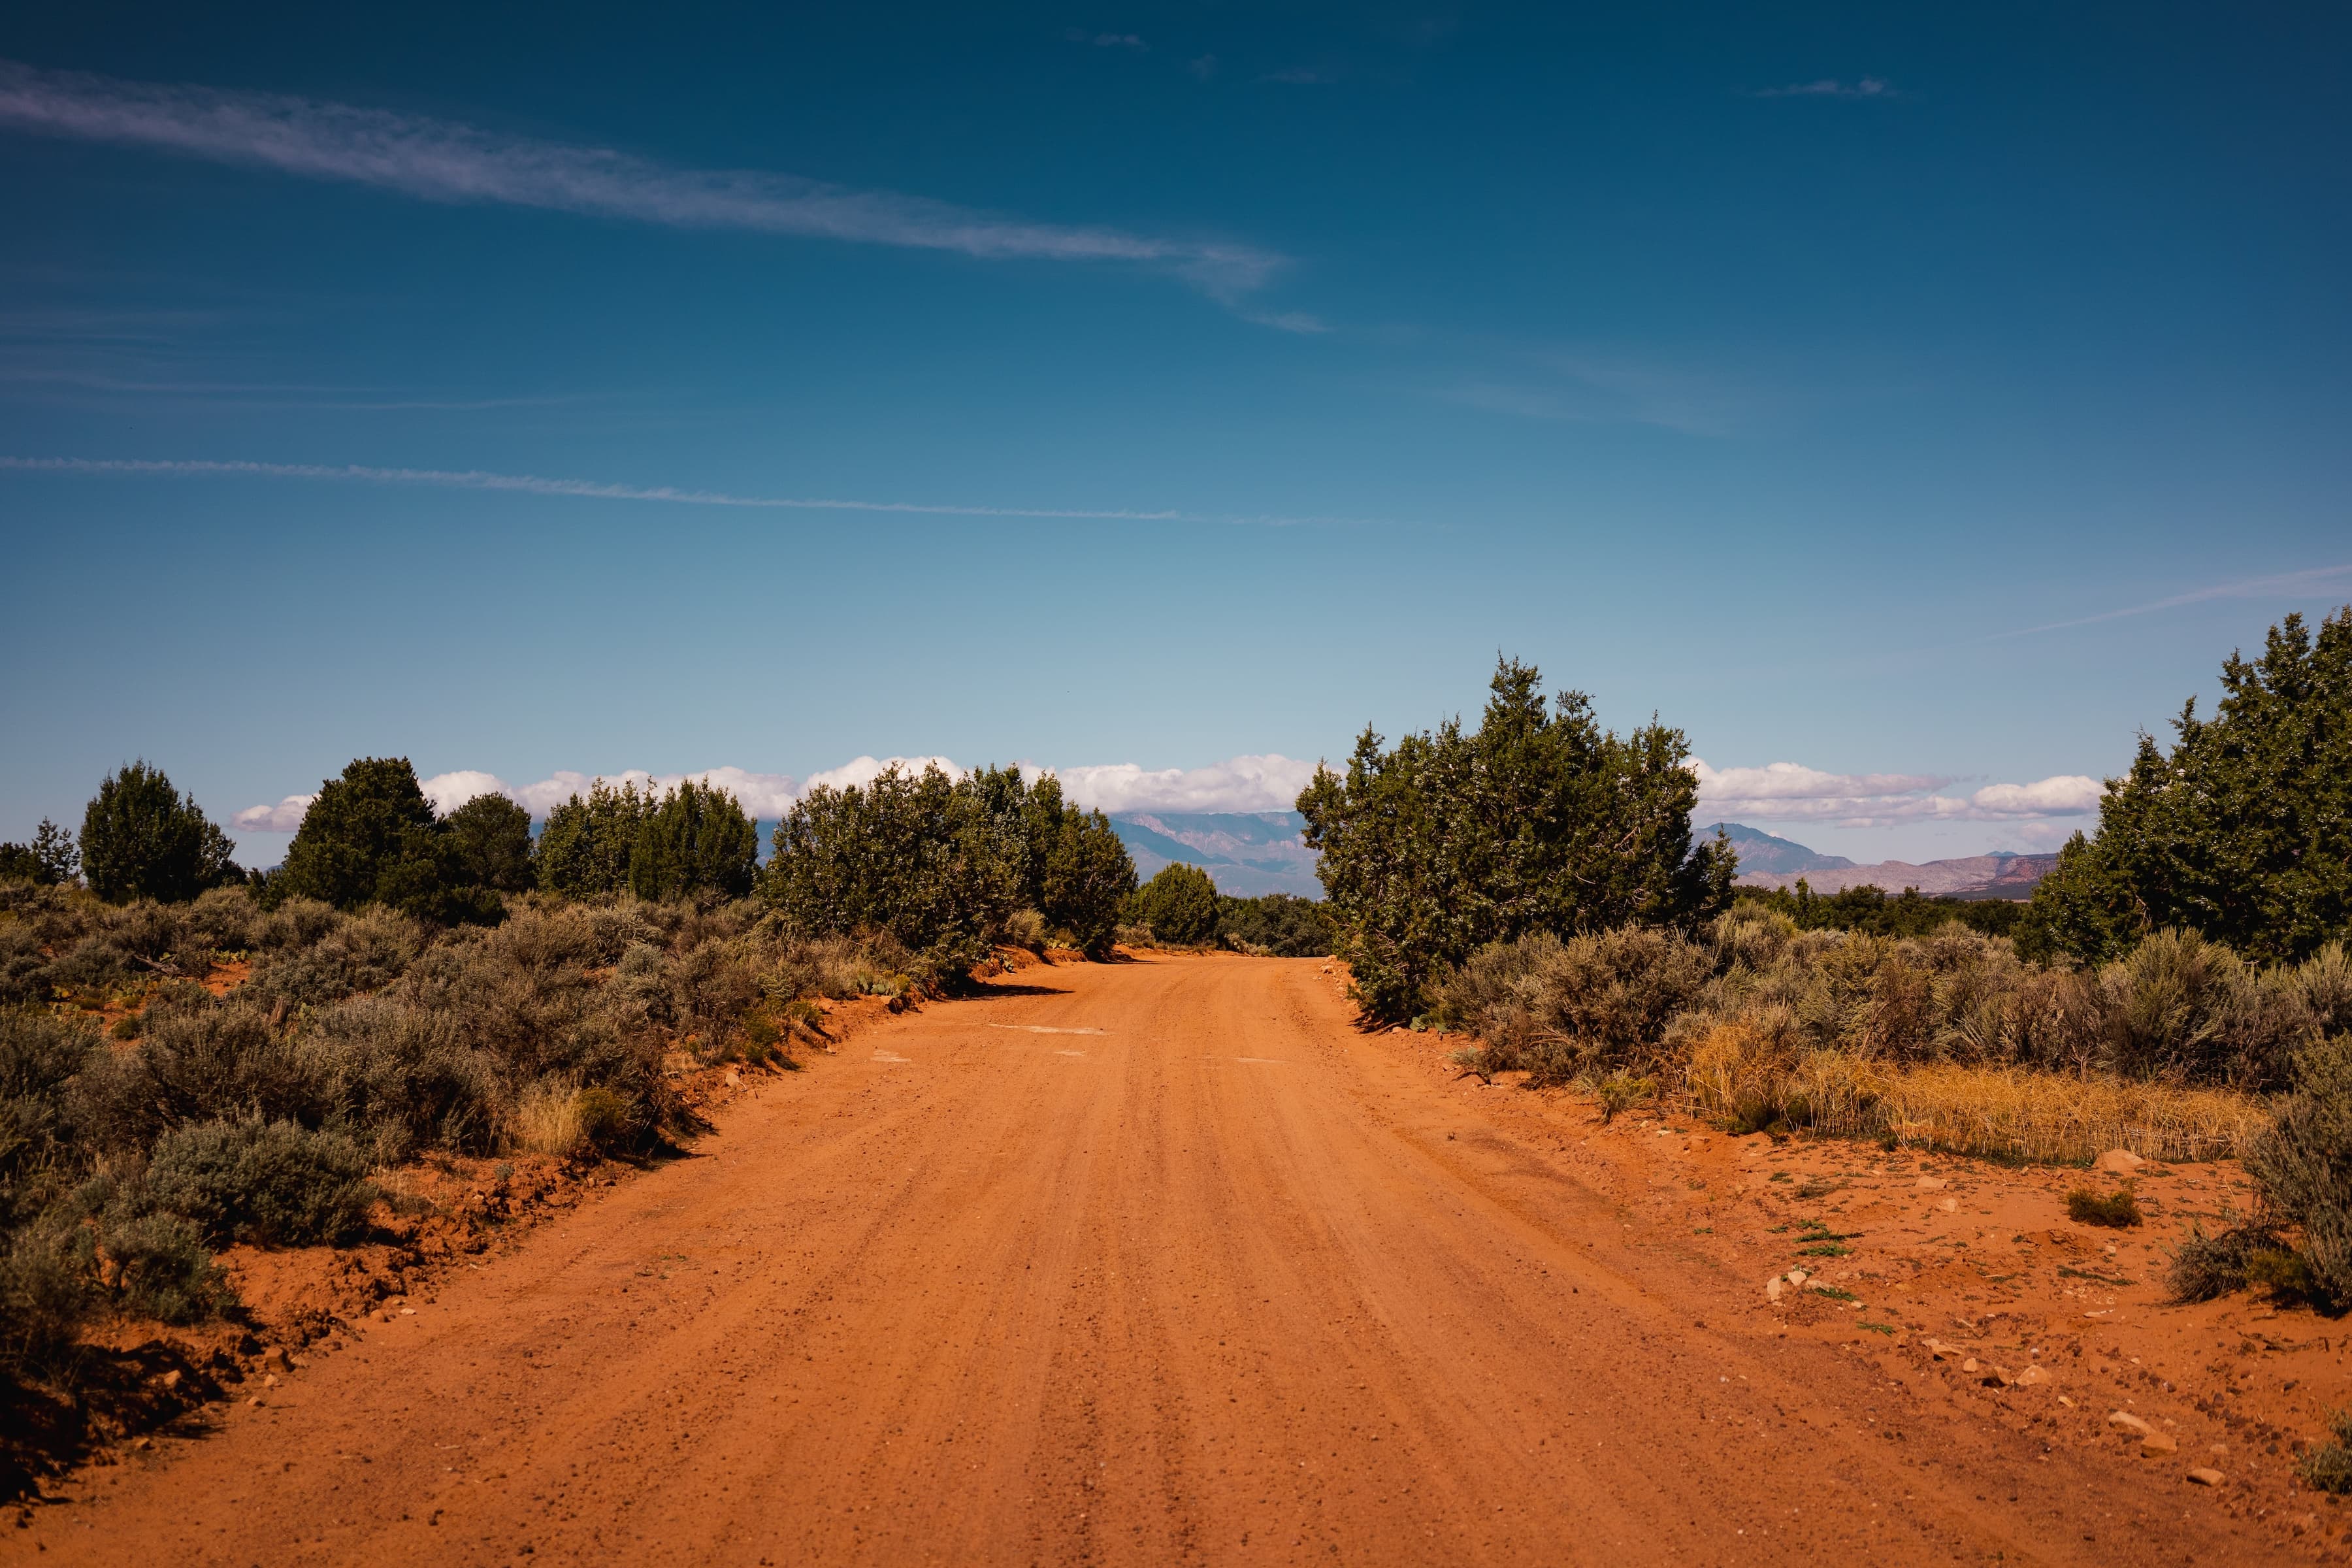 A dusty red dirt road meanders through a serene desert landscape, flanked by shrubs under a vast blue sky.